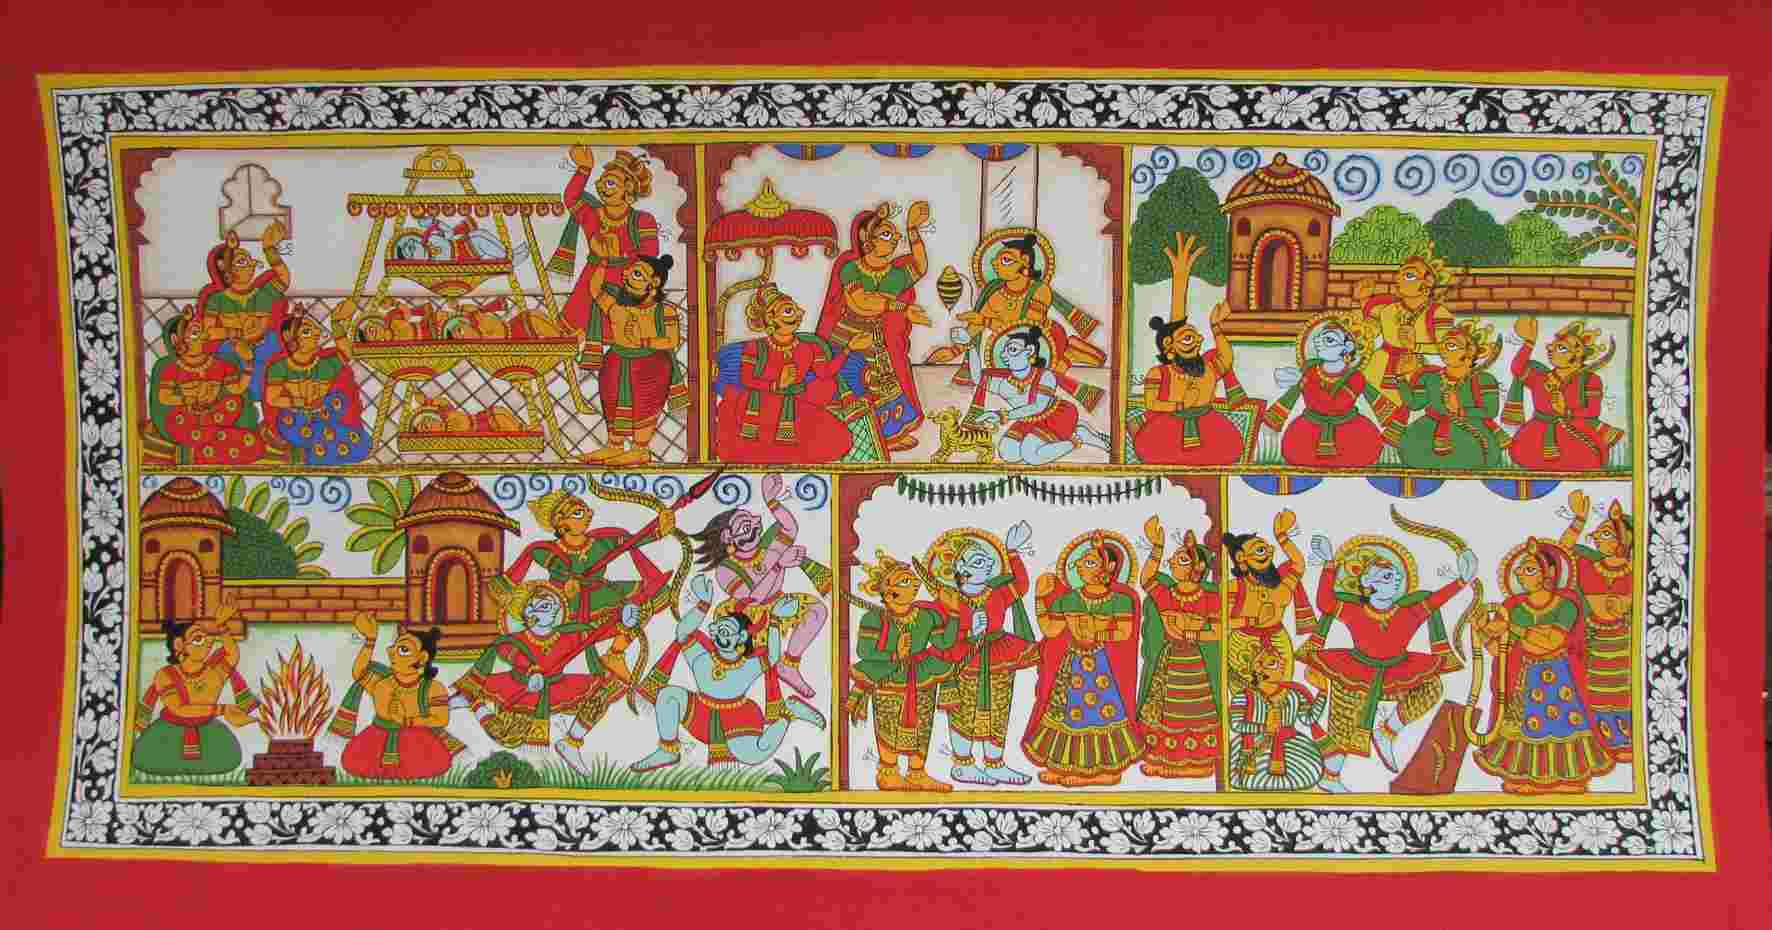 phad painting - art forms of India